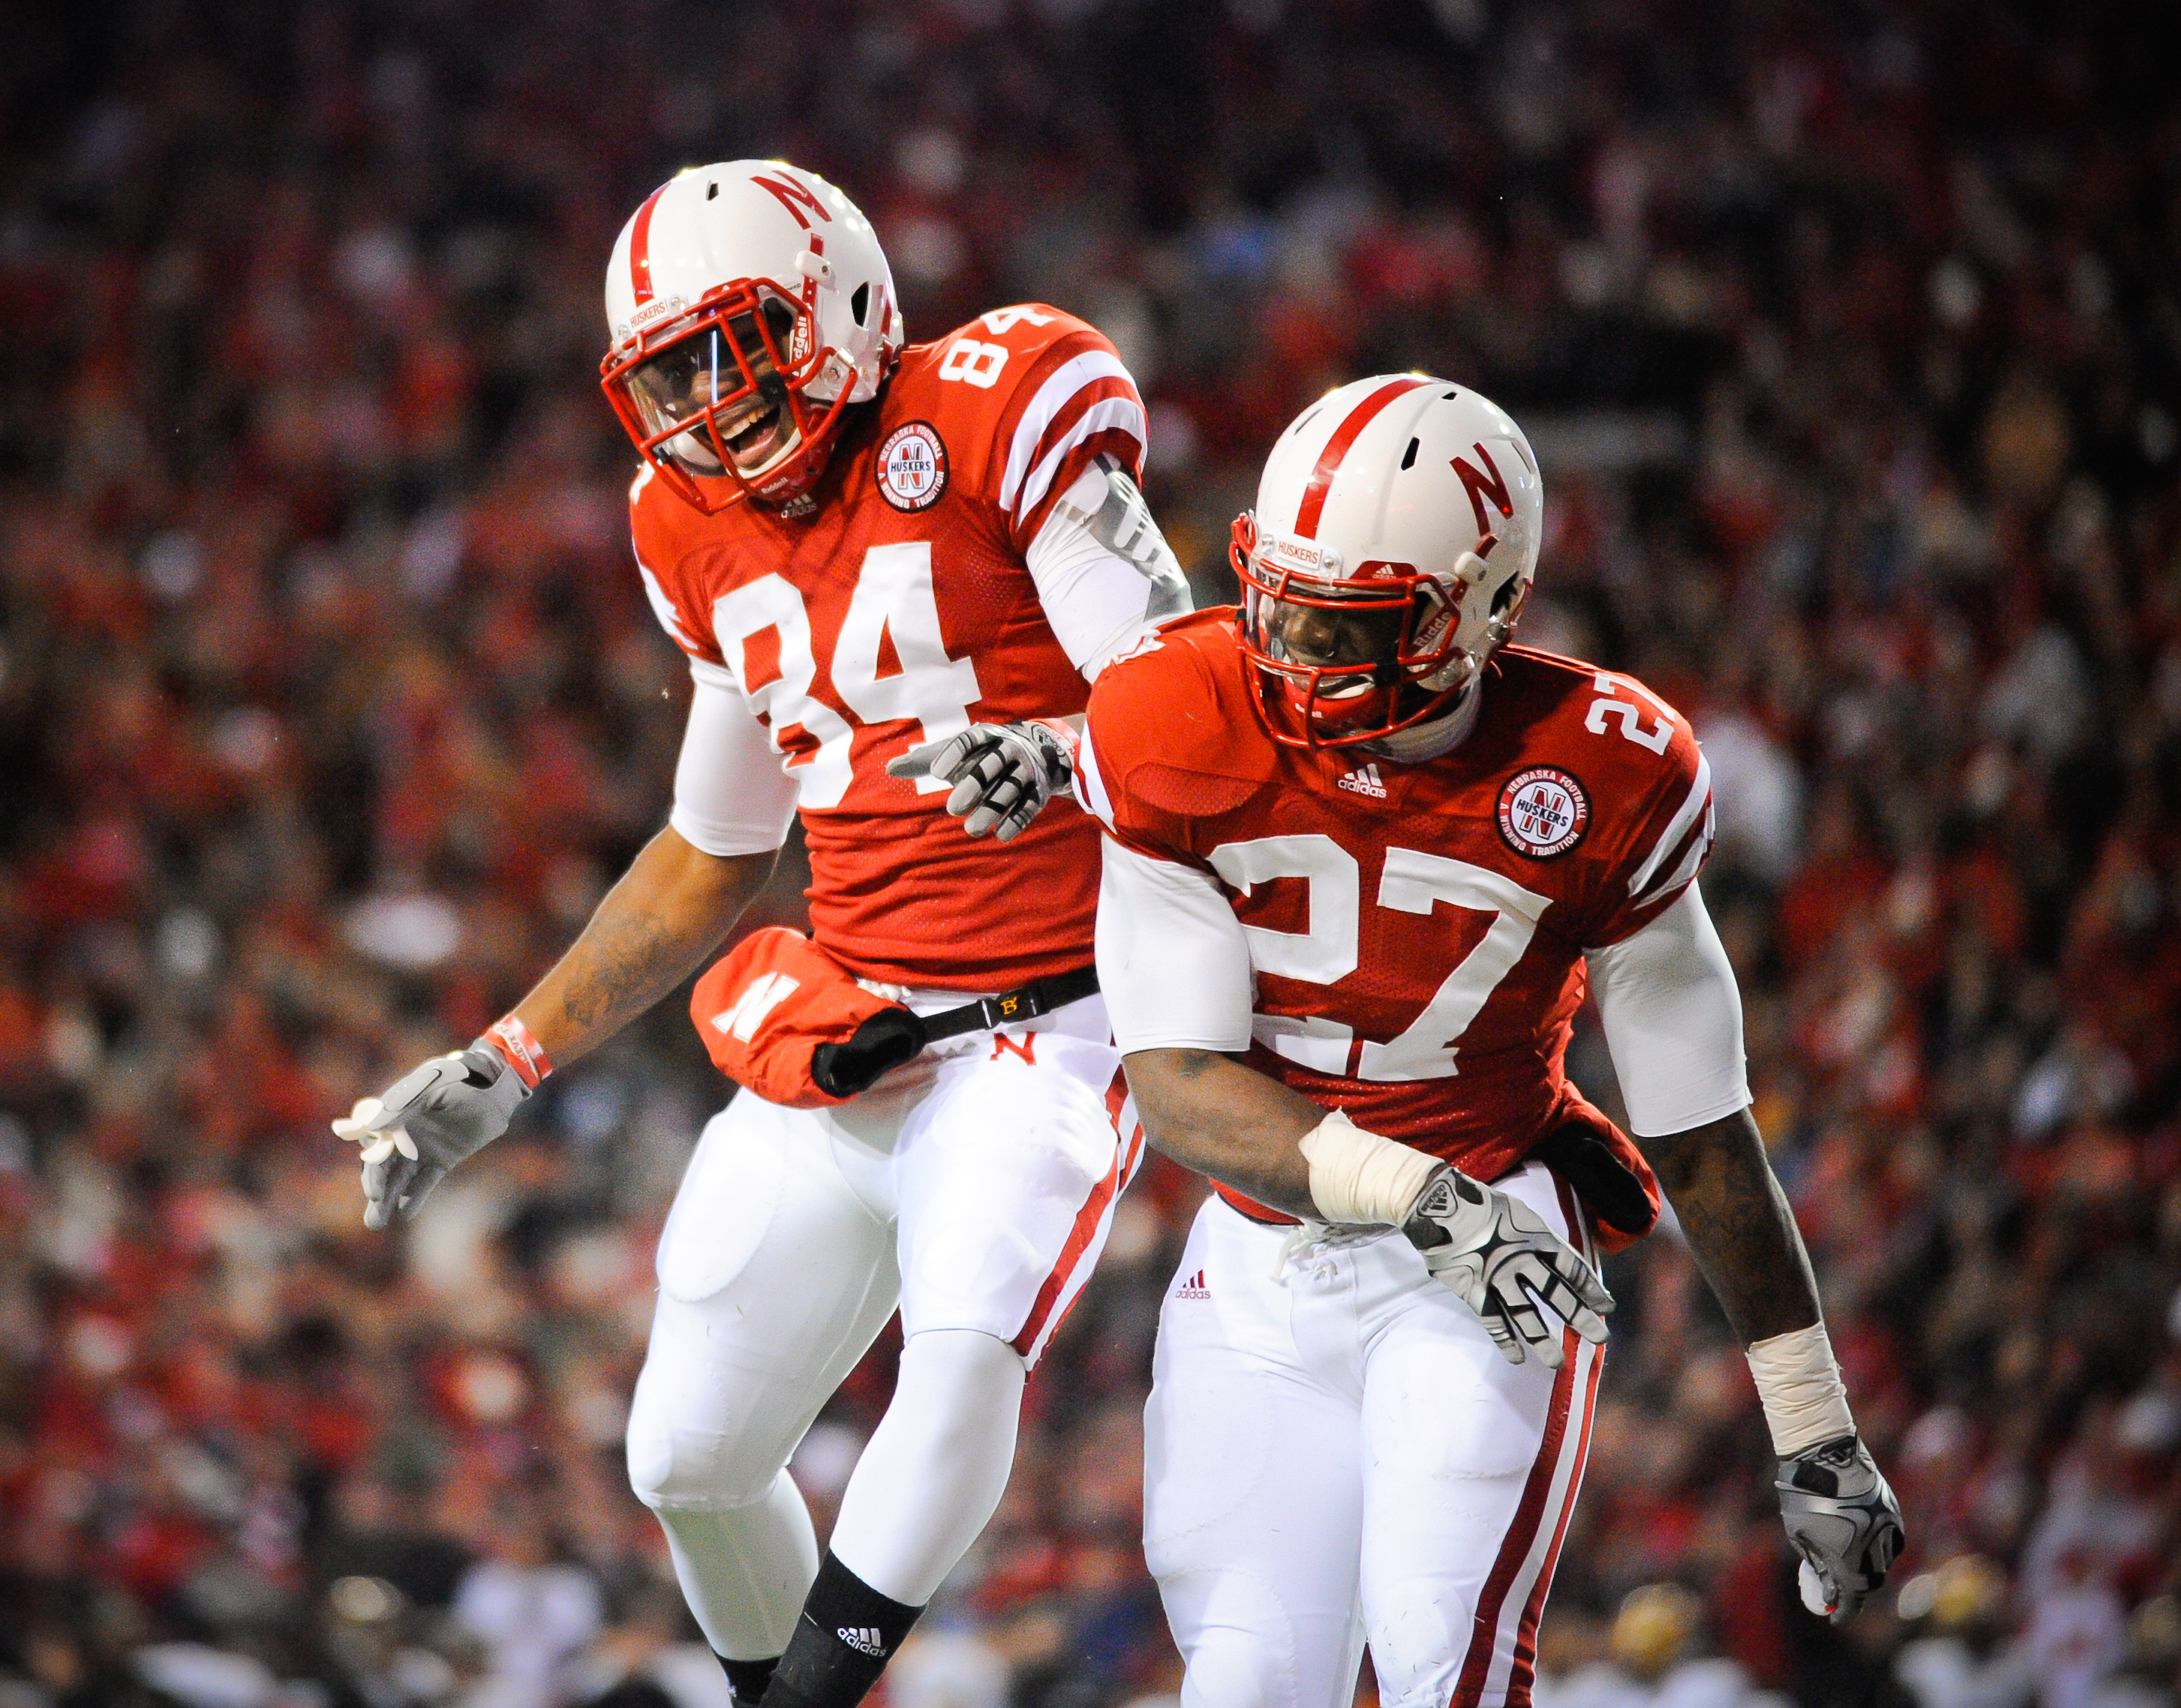 LINCOLN, NE - NOVEMBER 26: Dontrayevous Robinson #27 and Brandon Kinnie #84 of the Nebraska Cornhuskers celebrate a touchdown during their game against the Colorado Buffaloes at Memorial Stadium on November 26, 2010 in Lincoln, Nebraska. Nebraska defeated